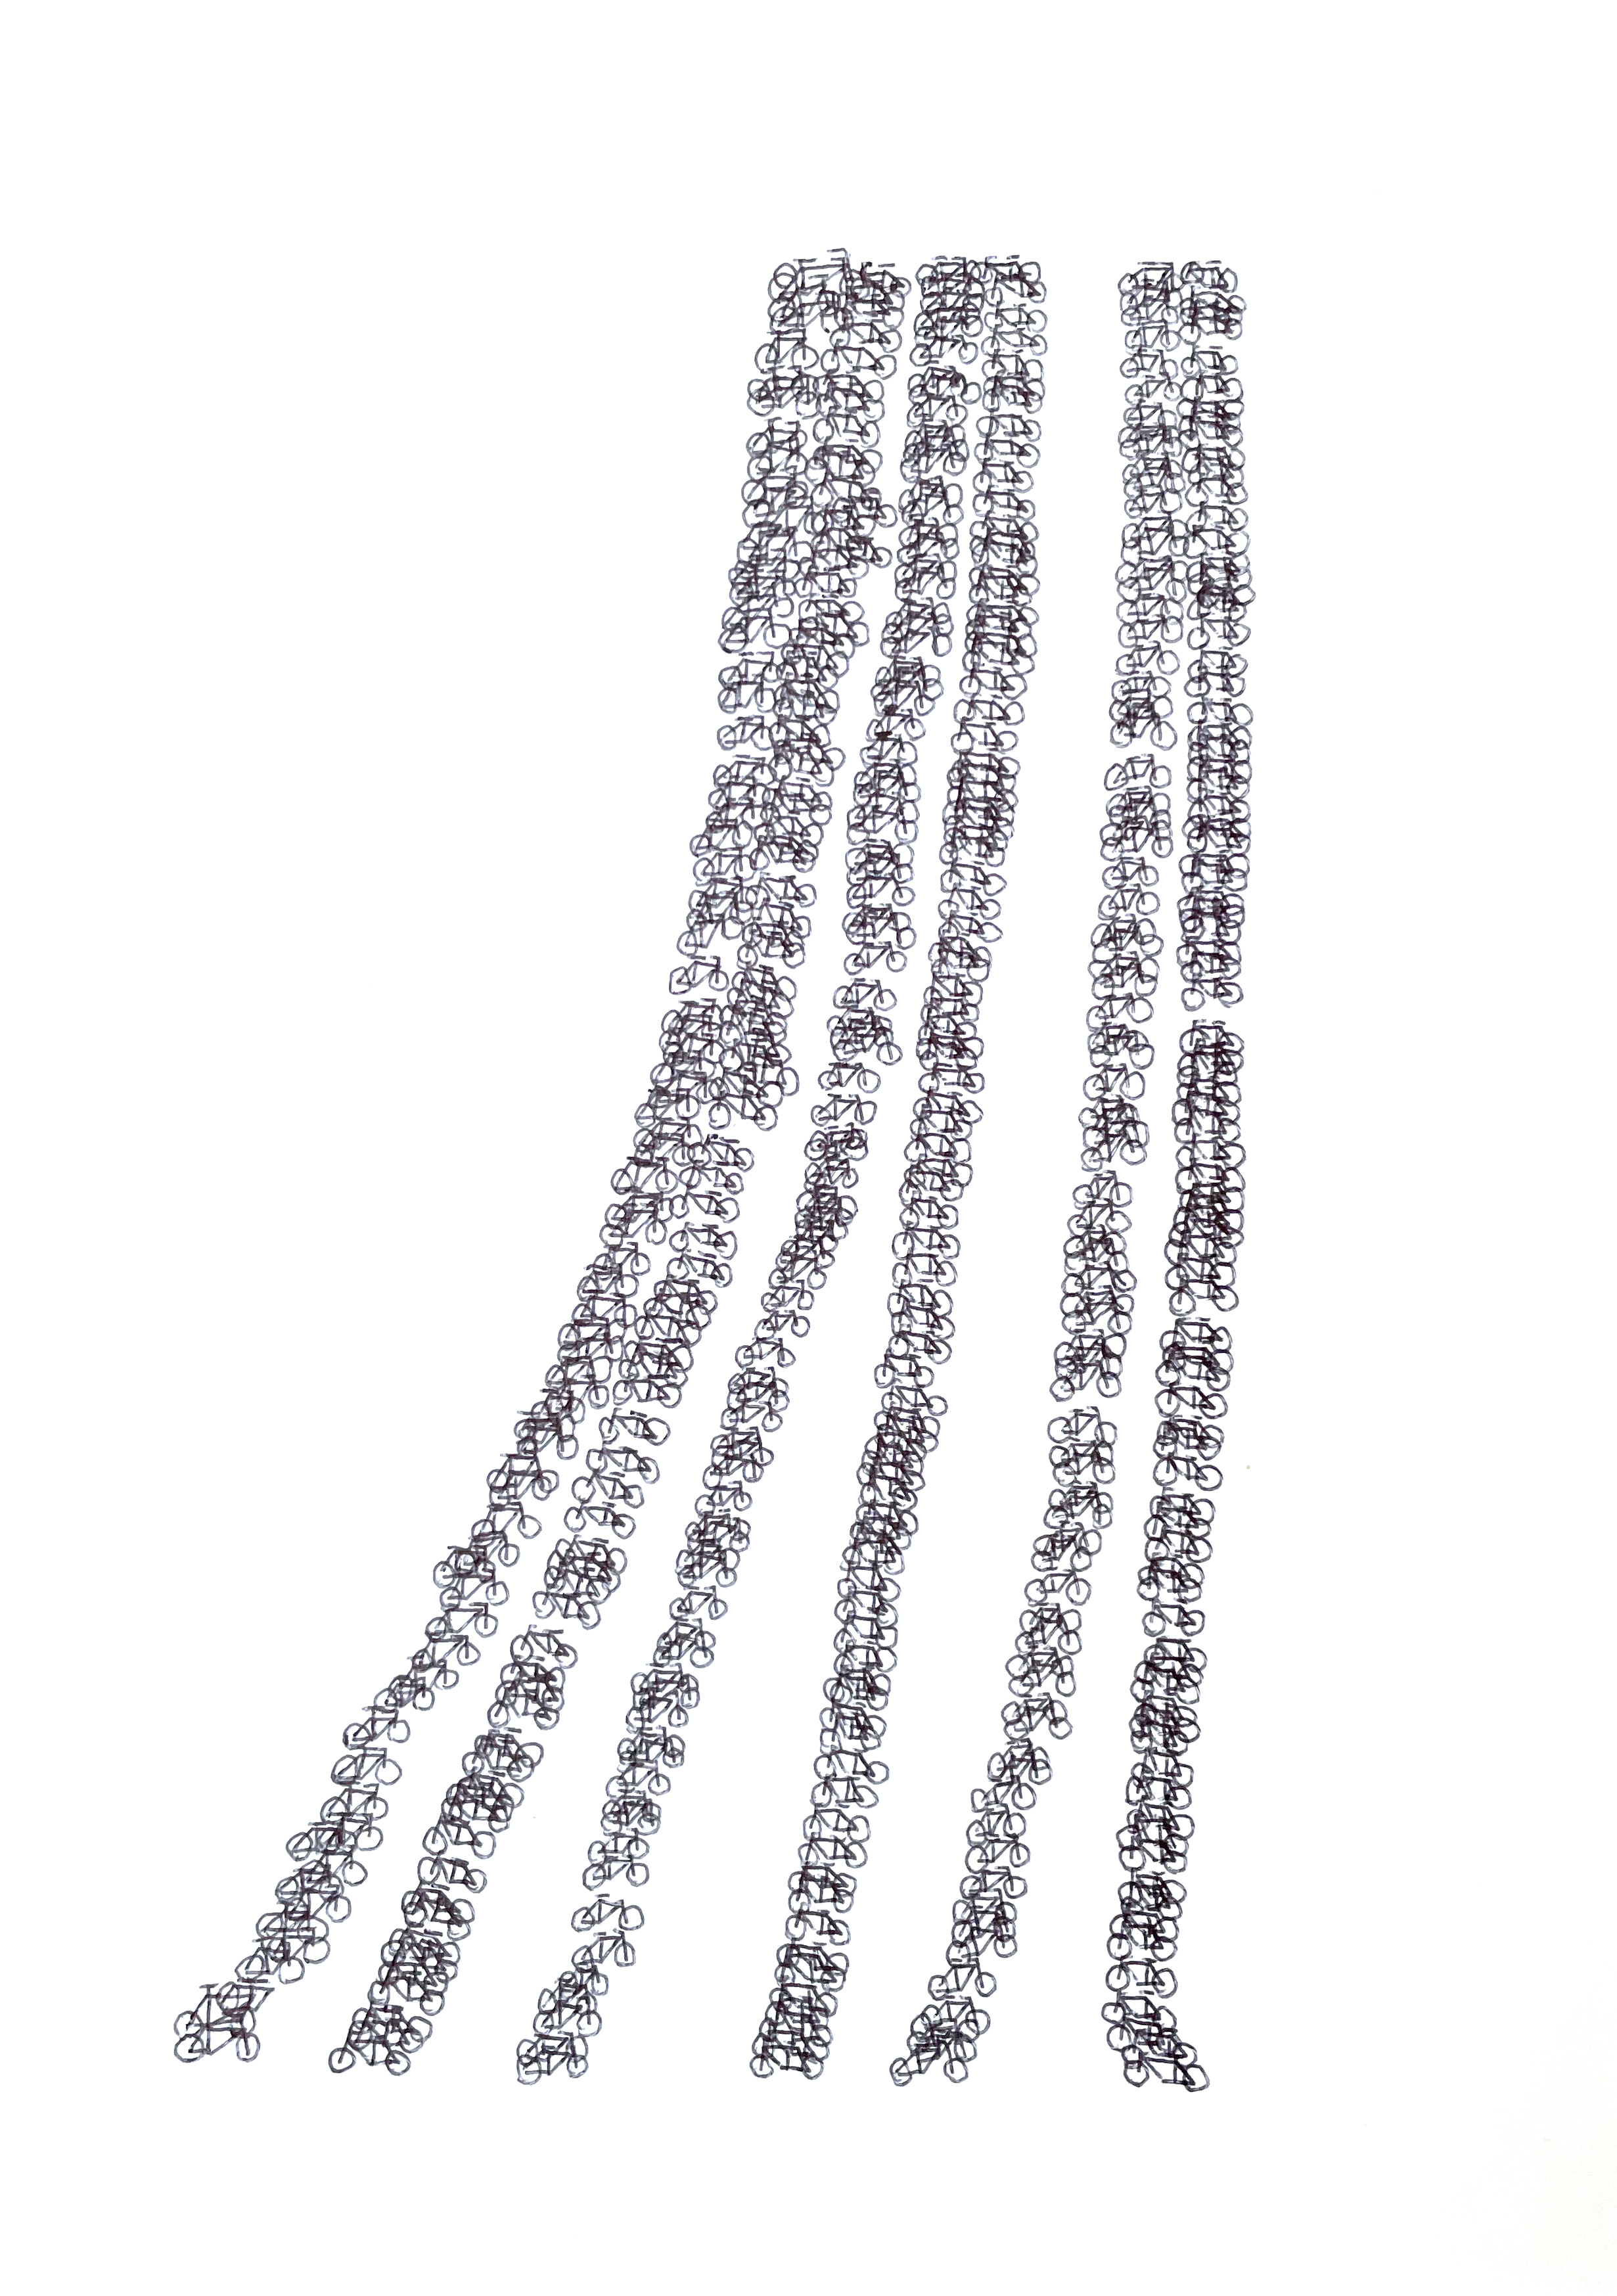 hundreds of small drawn bicycles are overlapped and lined in vertical stacks up the composition